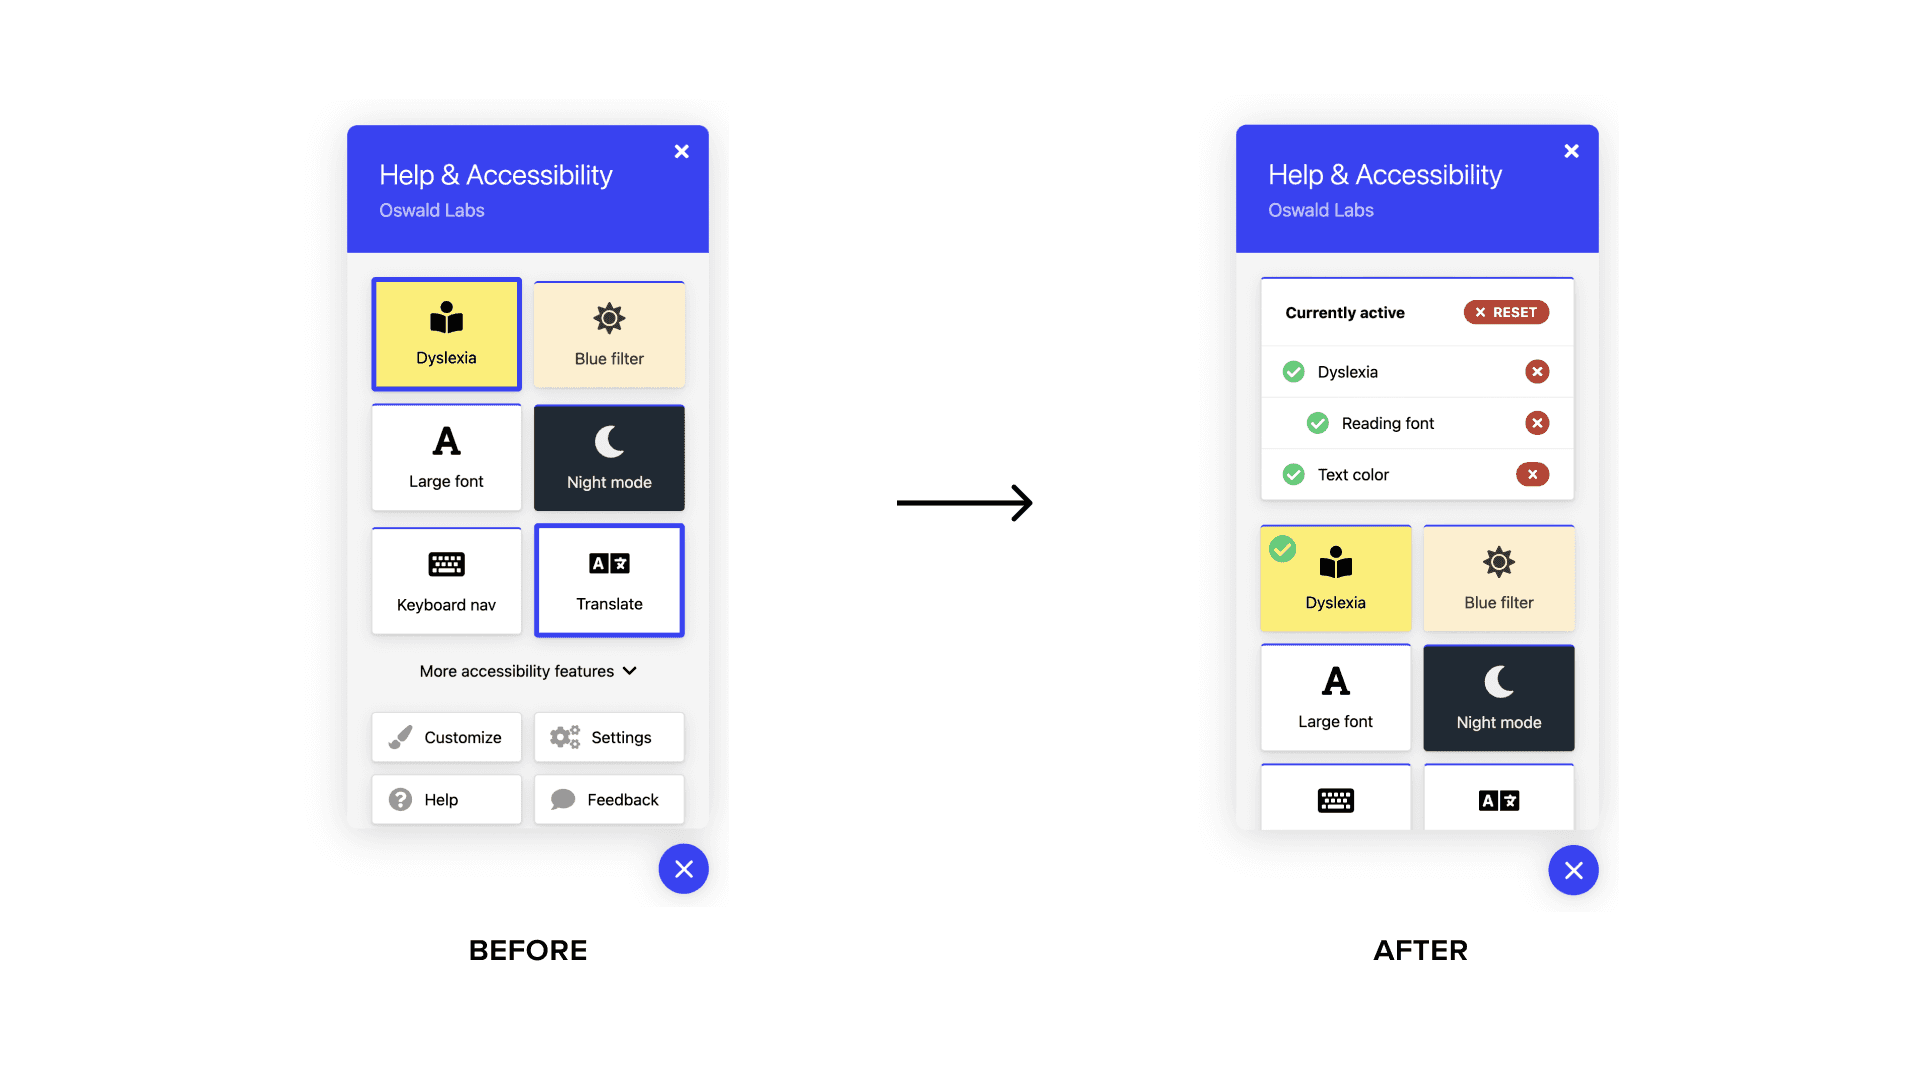 Before and after listing active modes